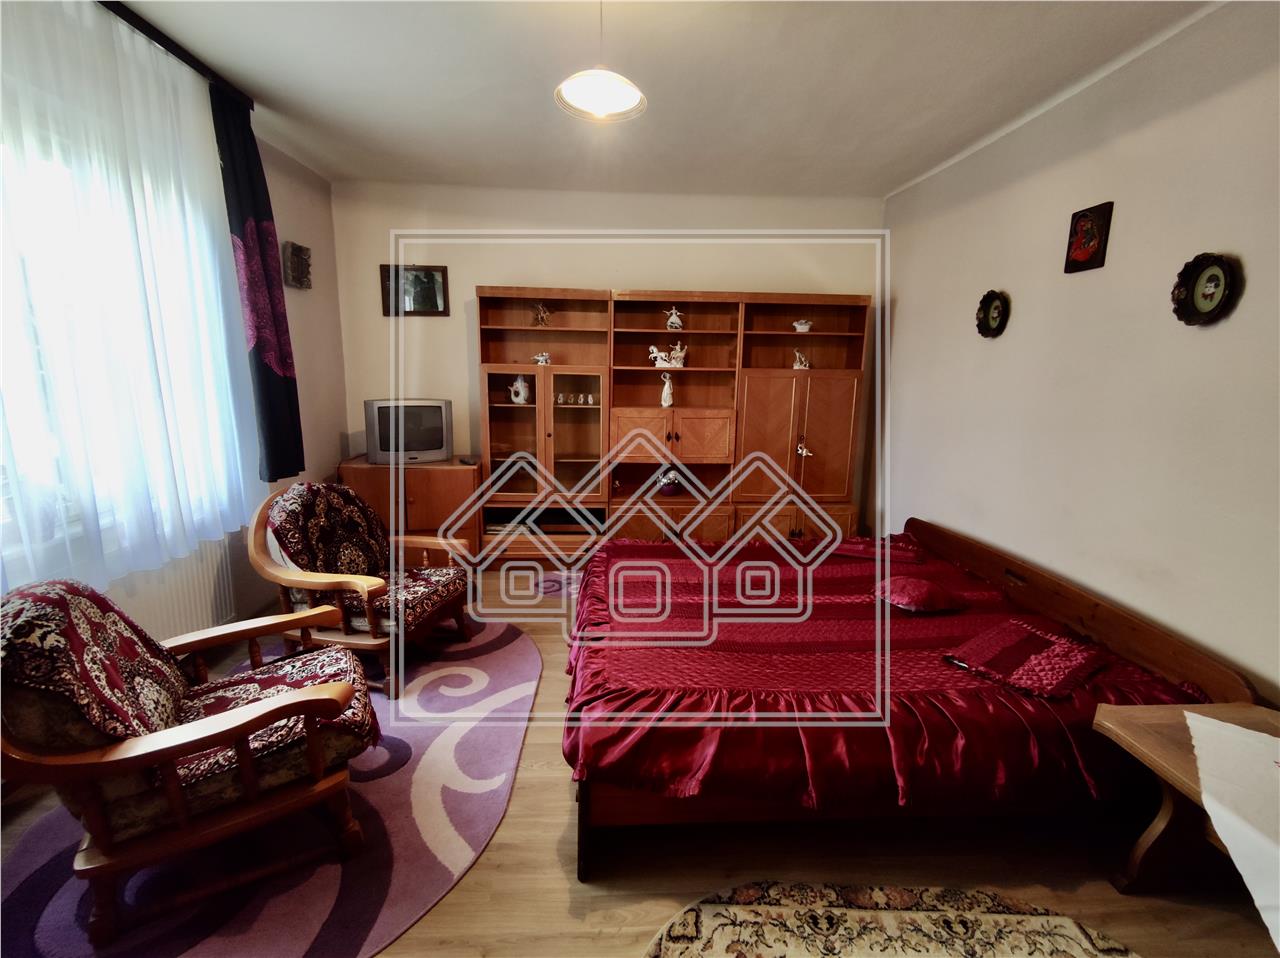 One bedroom apartment for rent in Sibiu